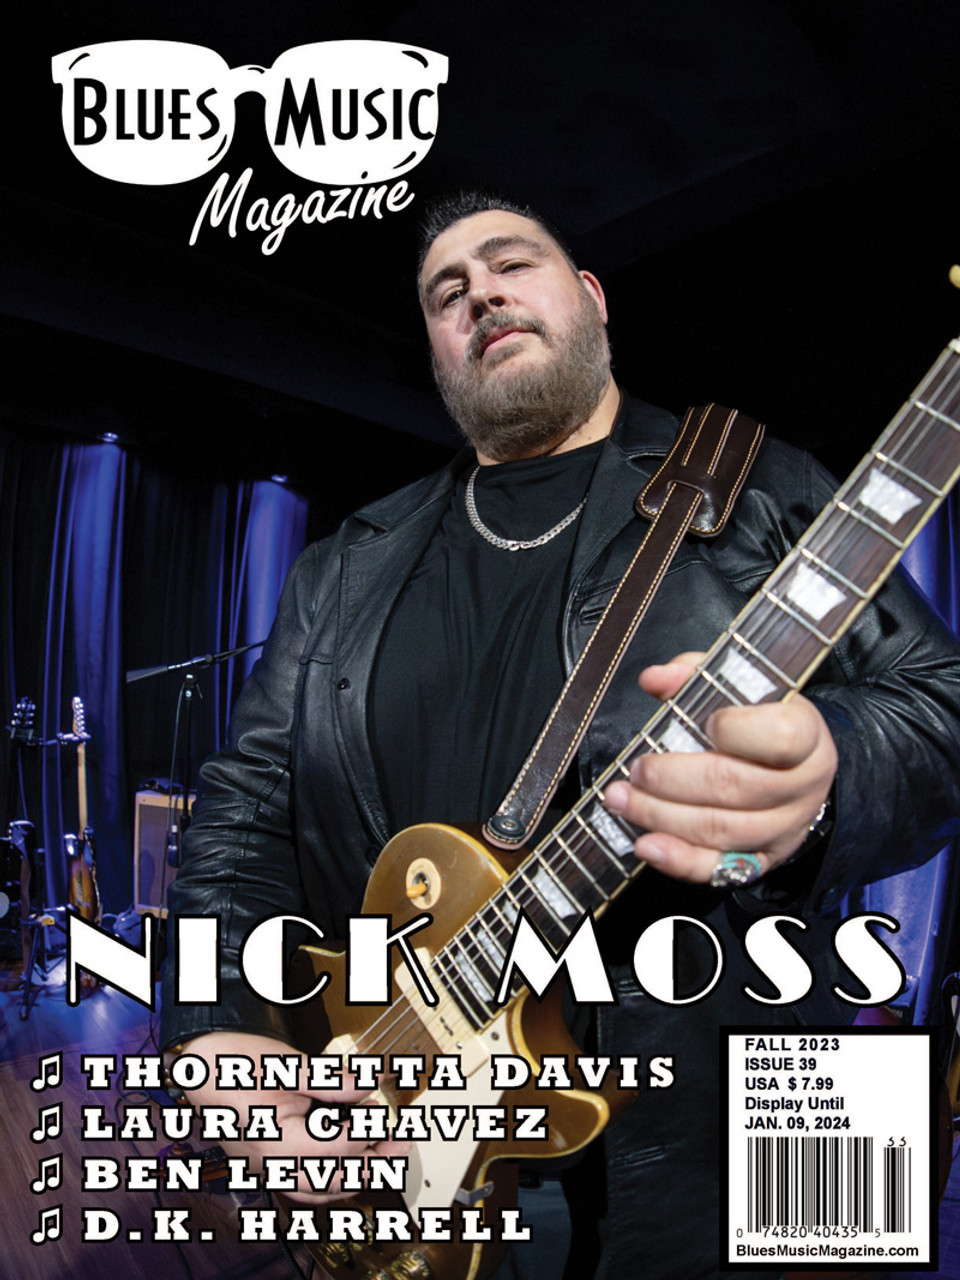 4 ISSUES PLUS TWO BONUS CDs AND FREE USA SHIPPING ONLY: